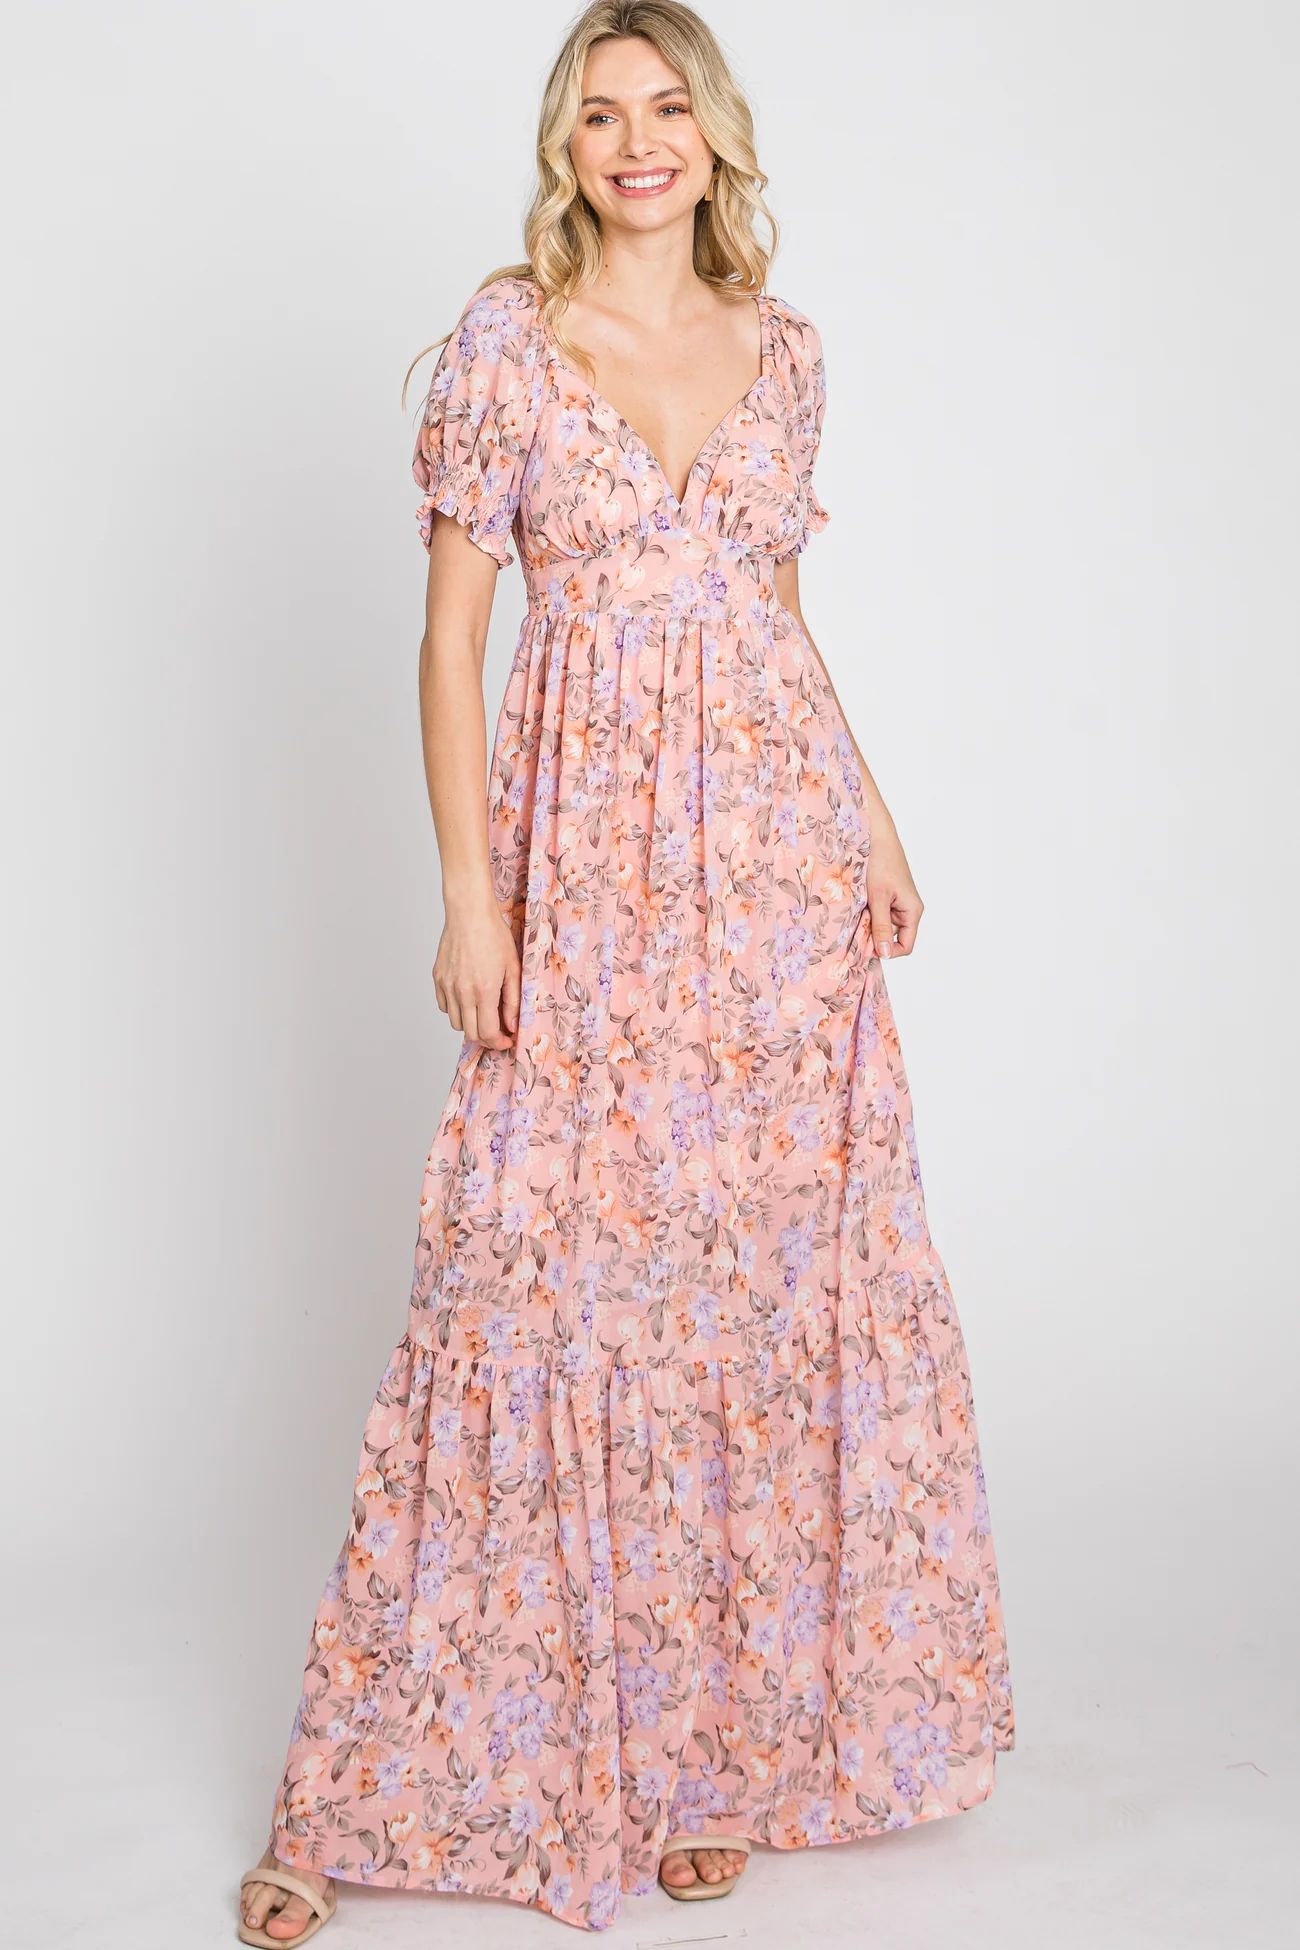 Pink Floral Sweetheart Neck Puff Sleeve Maxi Dress | PinkBlush Maternity